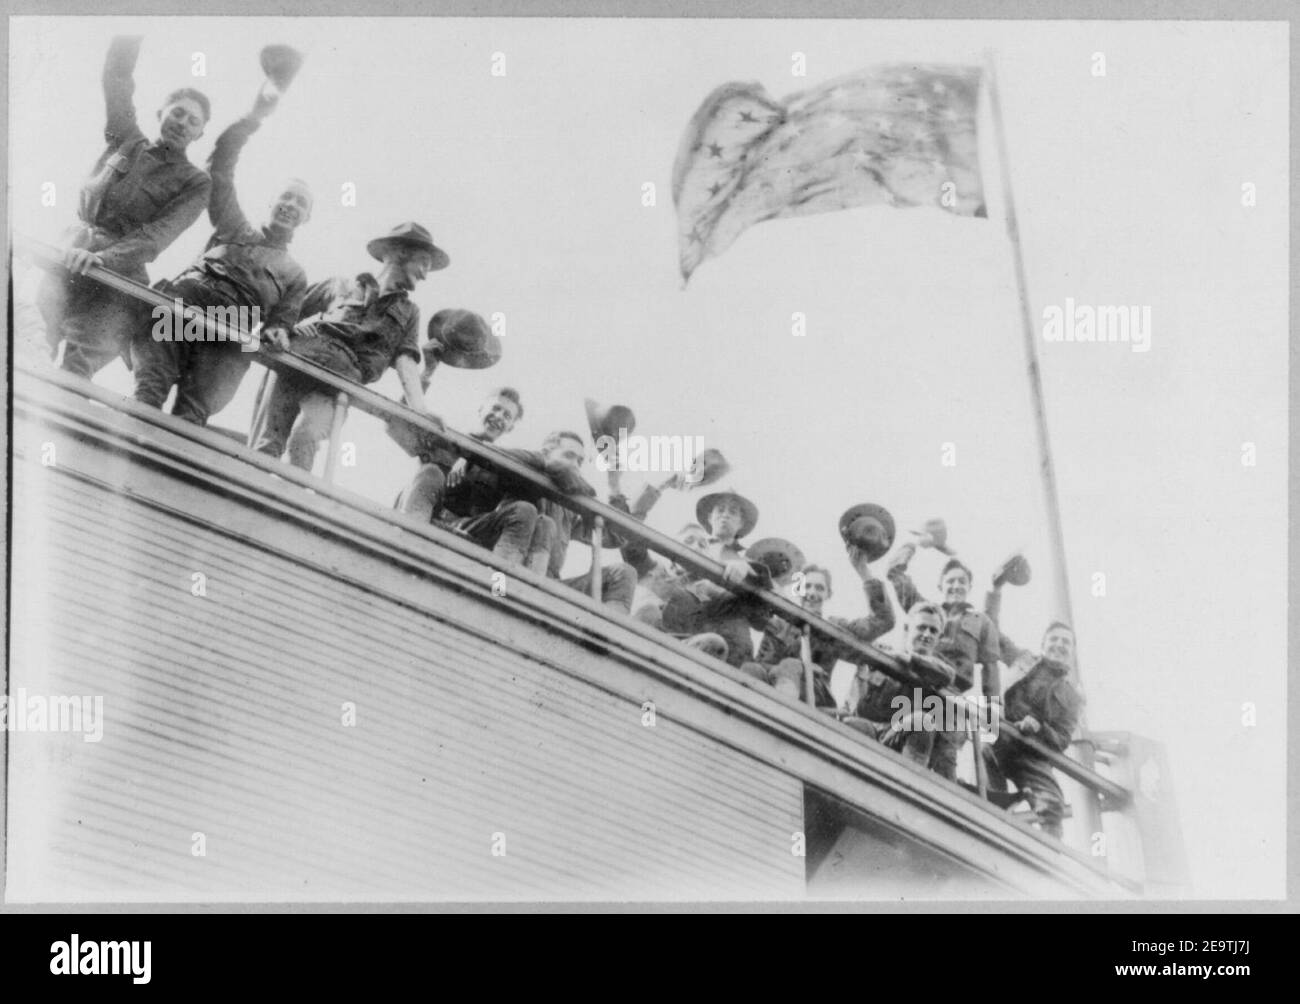 N.Y. National Guard training and maneuvers at Fishkill and Peekskill, N.Y.- Men waving from railing of ferry enroute to Fishkill Stock Photo